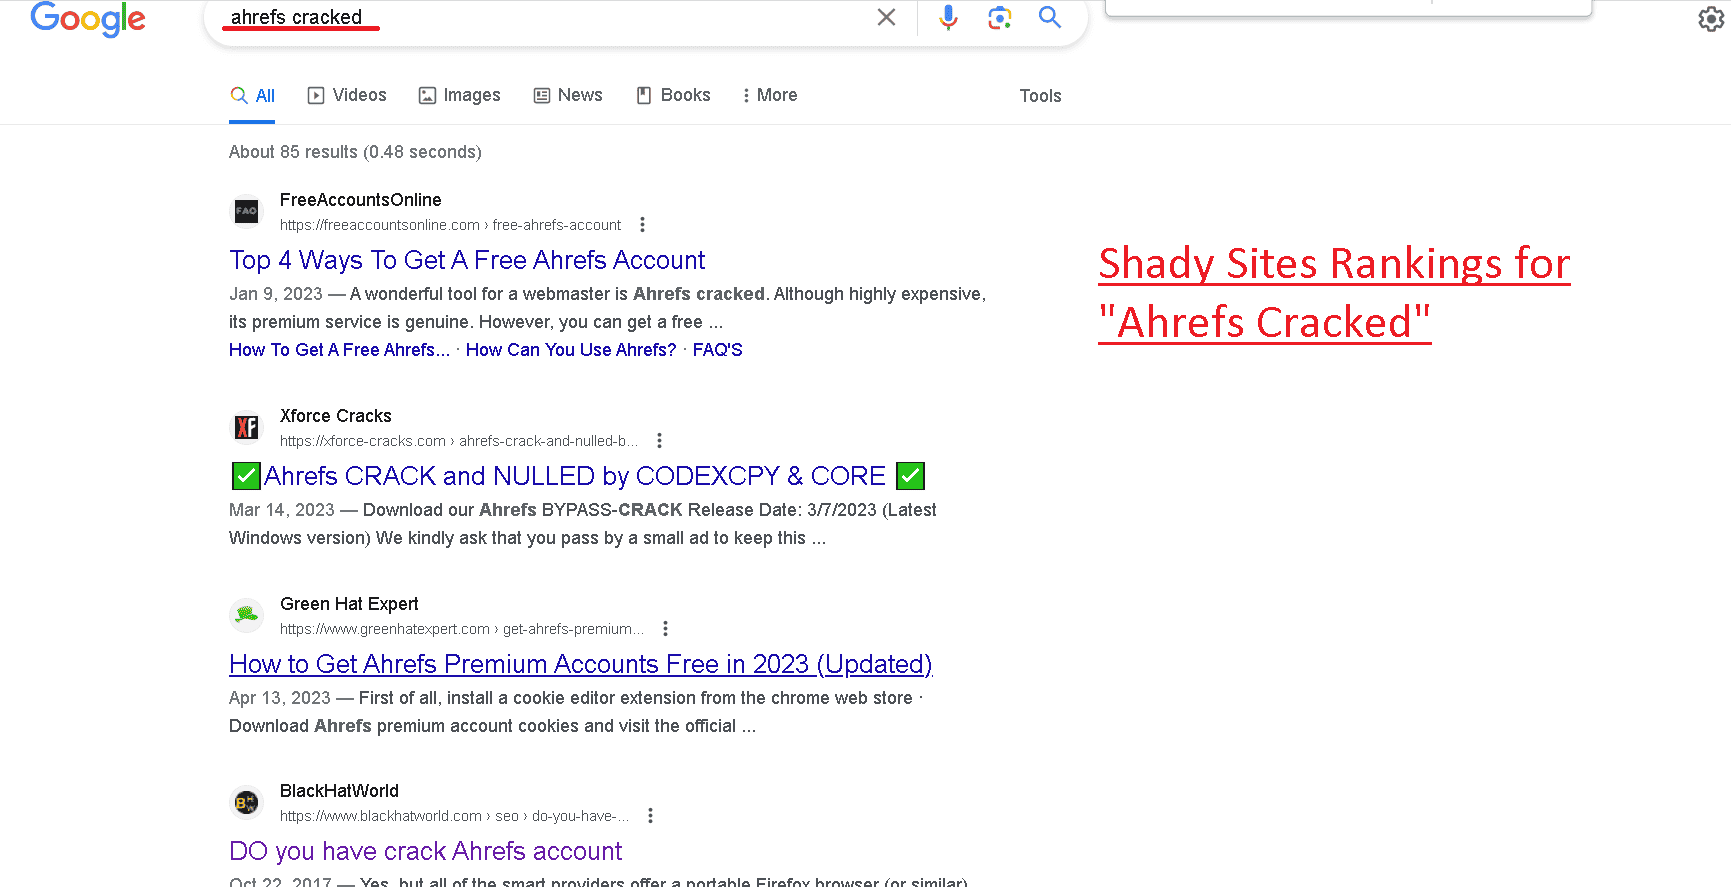 "Ahrefs cracked" in Google search